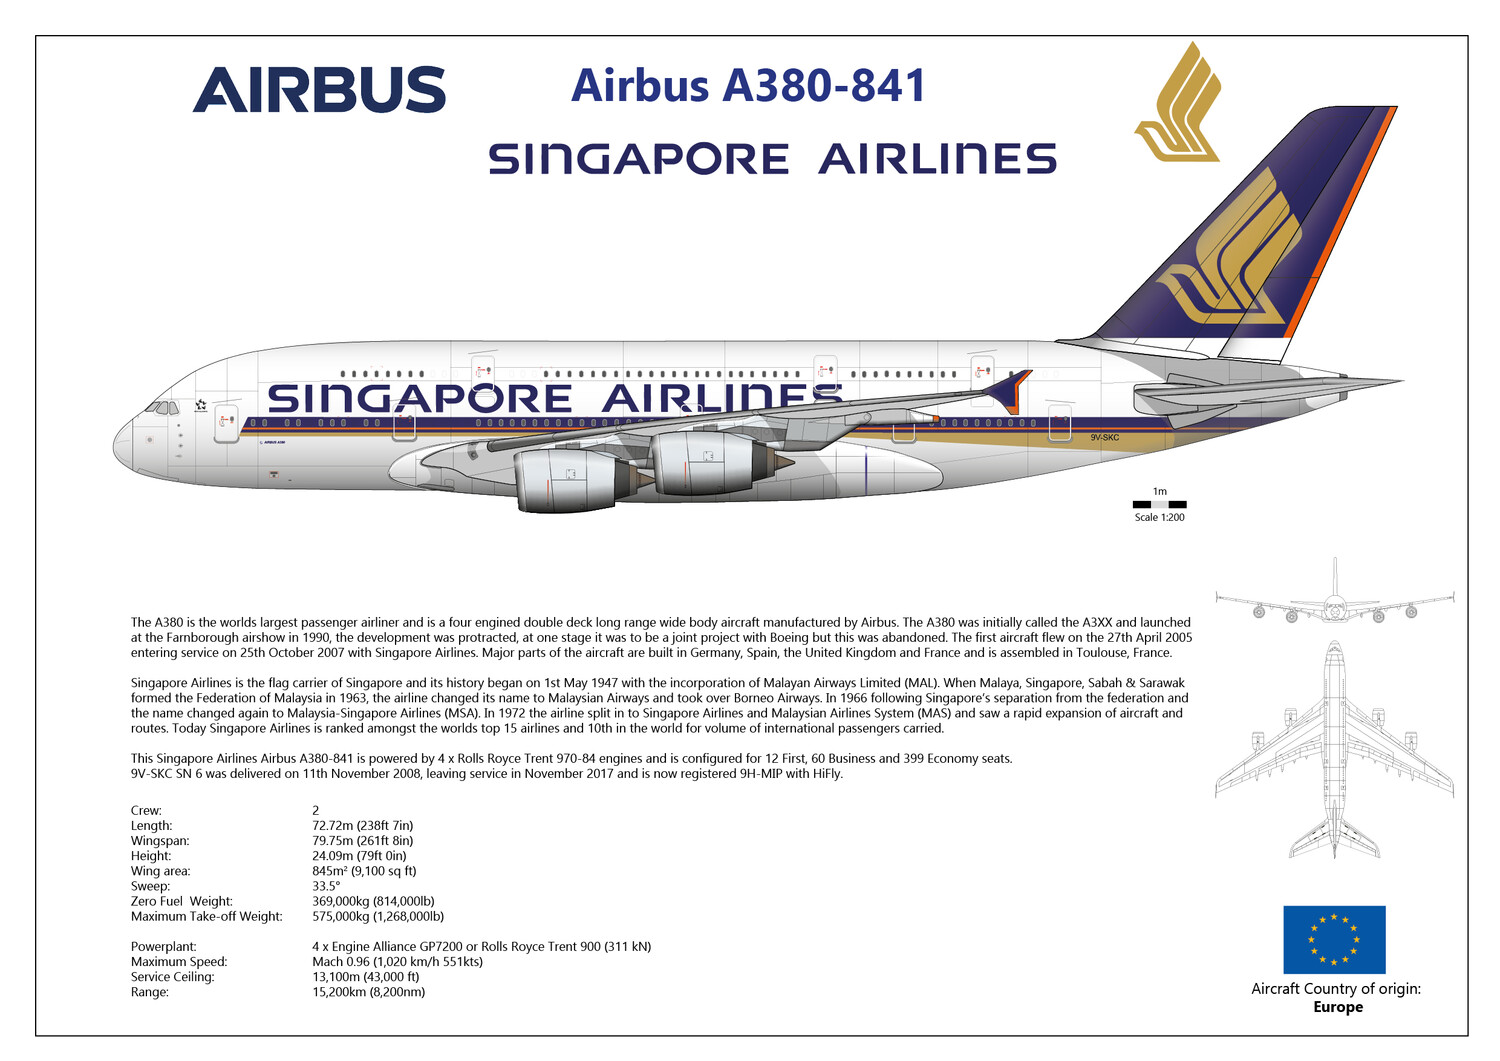 Airbus A380 of Singapore Airlines - Layout B